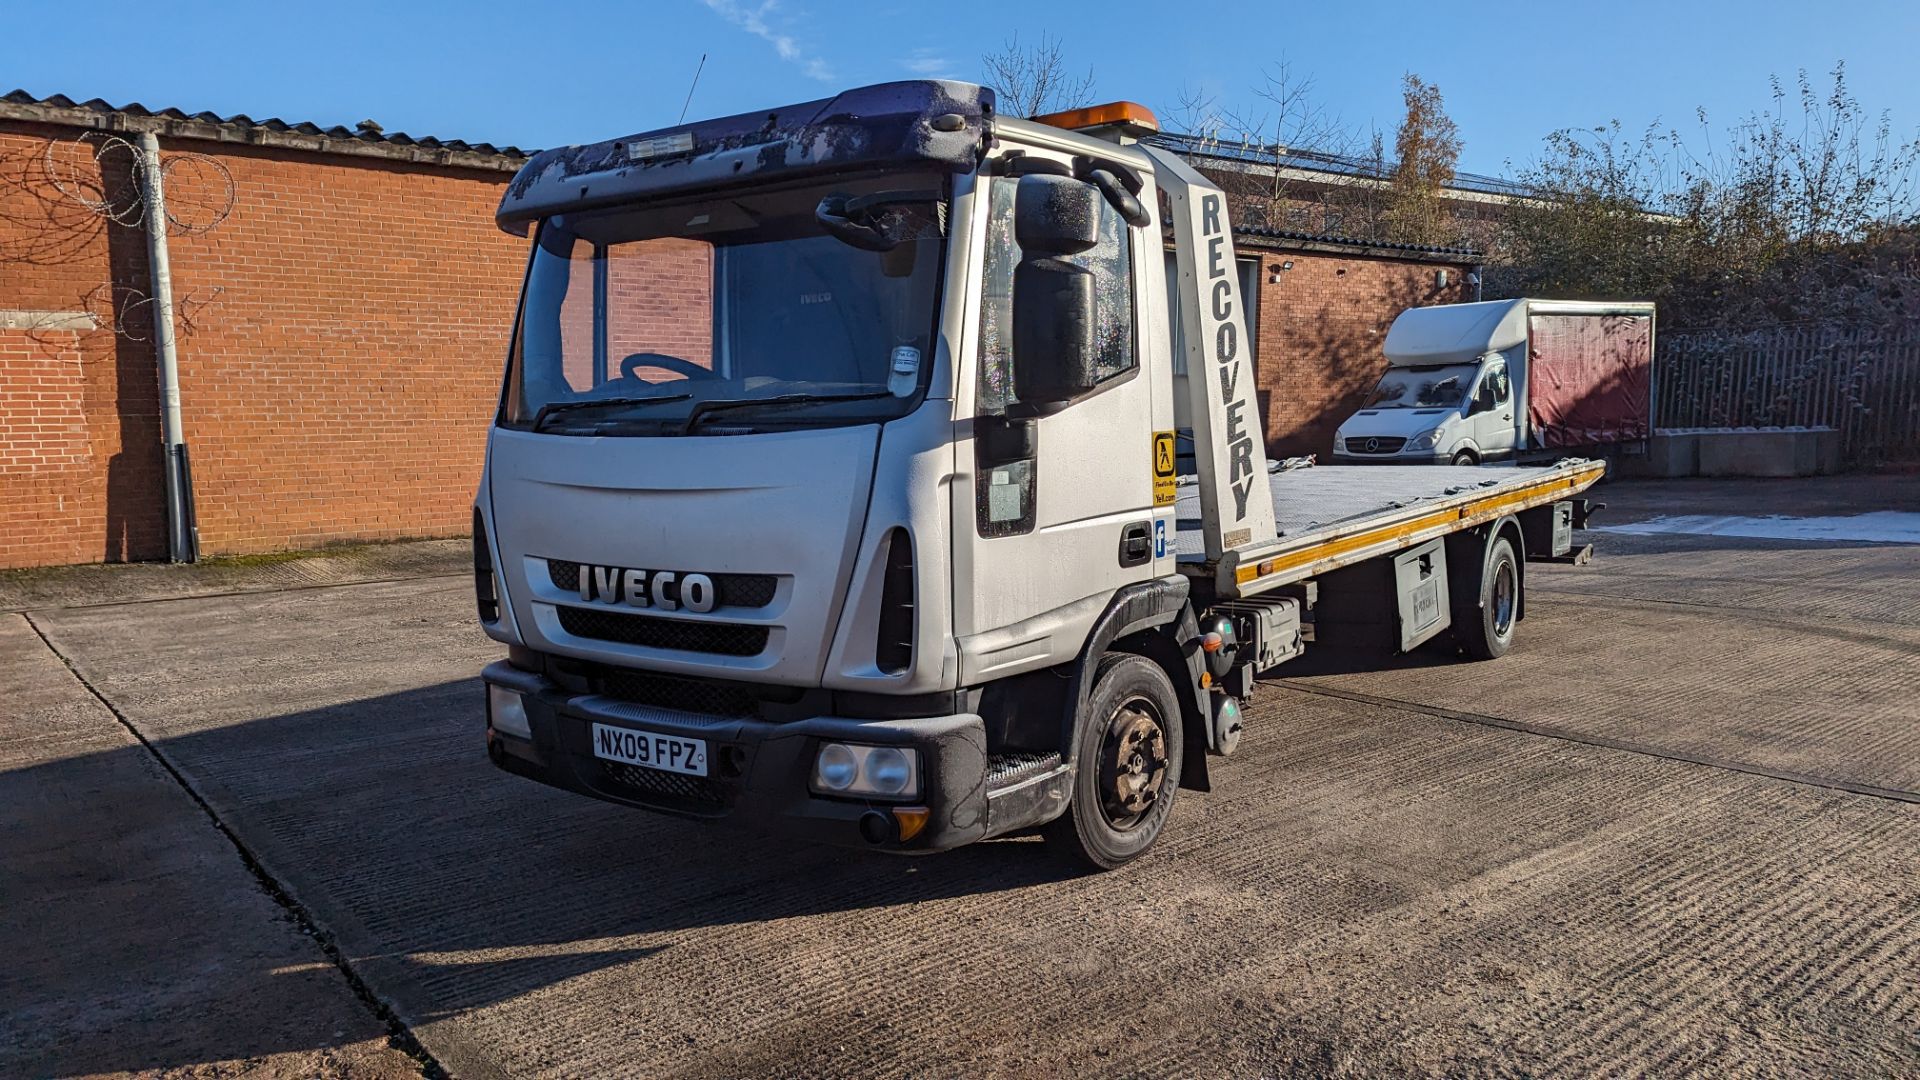 NX09 FPZ Iveco Euro 5 recovery truck. MOT valid until Jun 2024